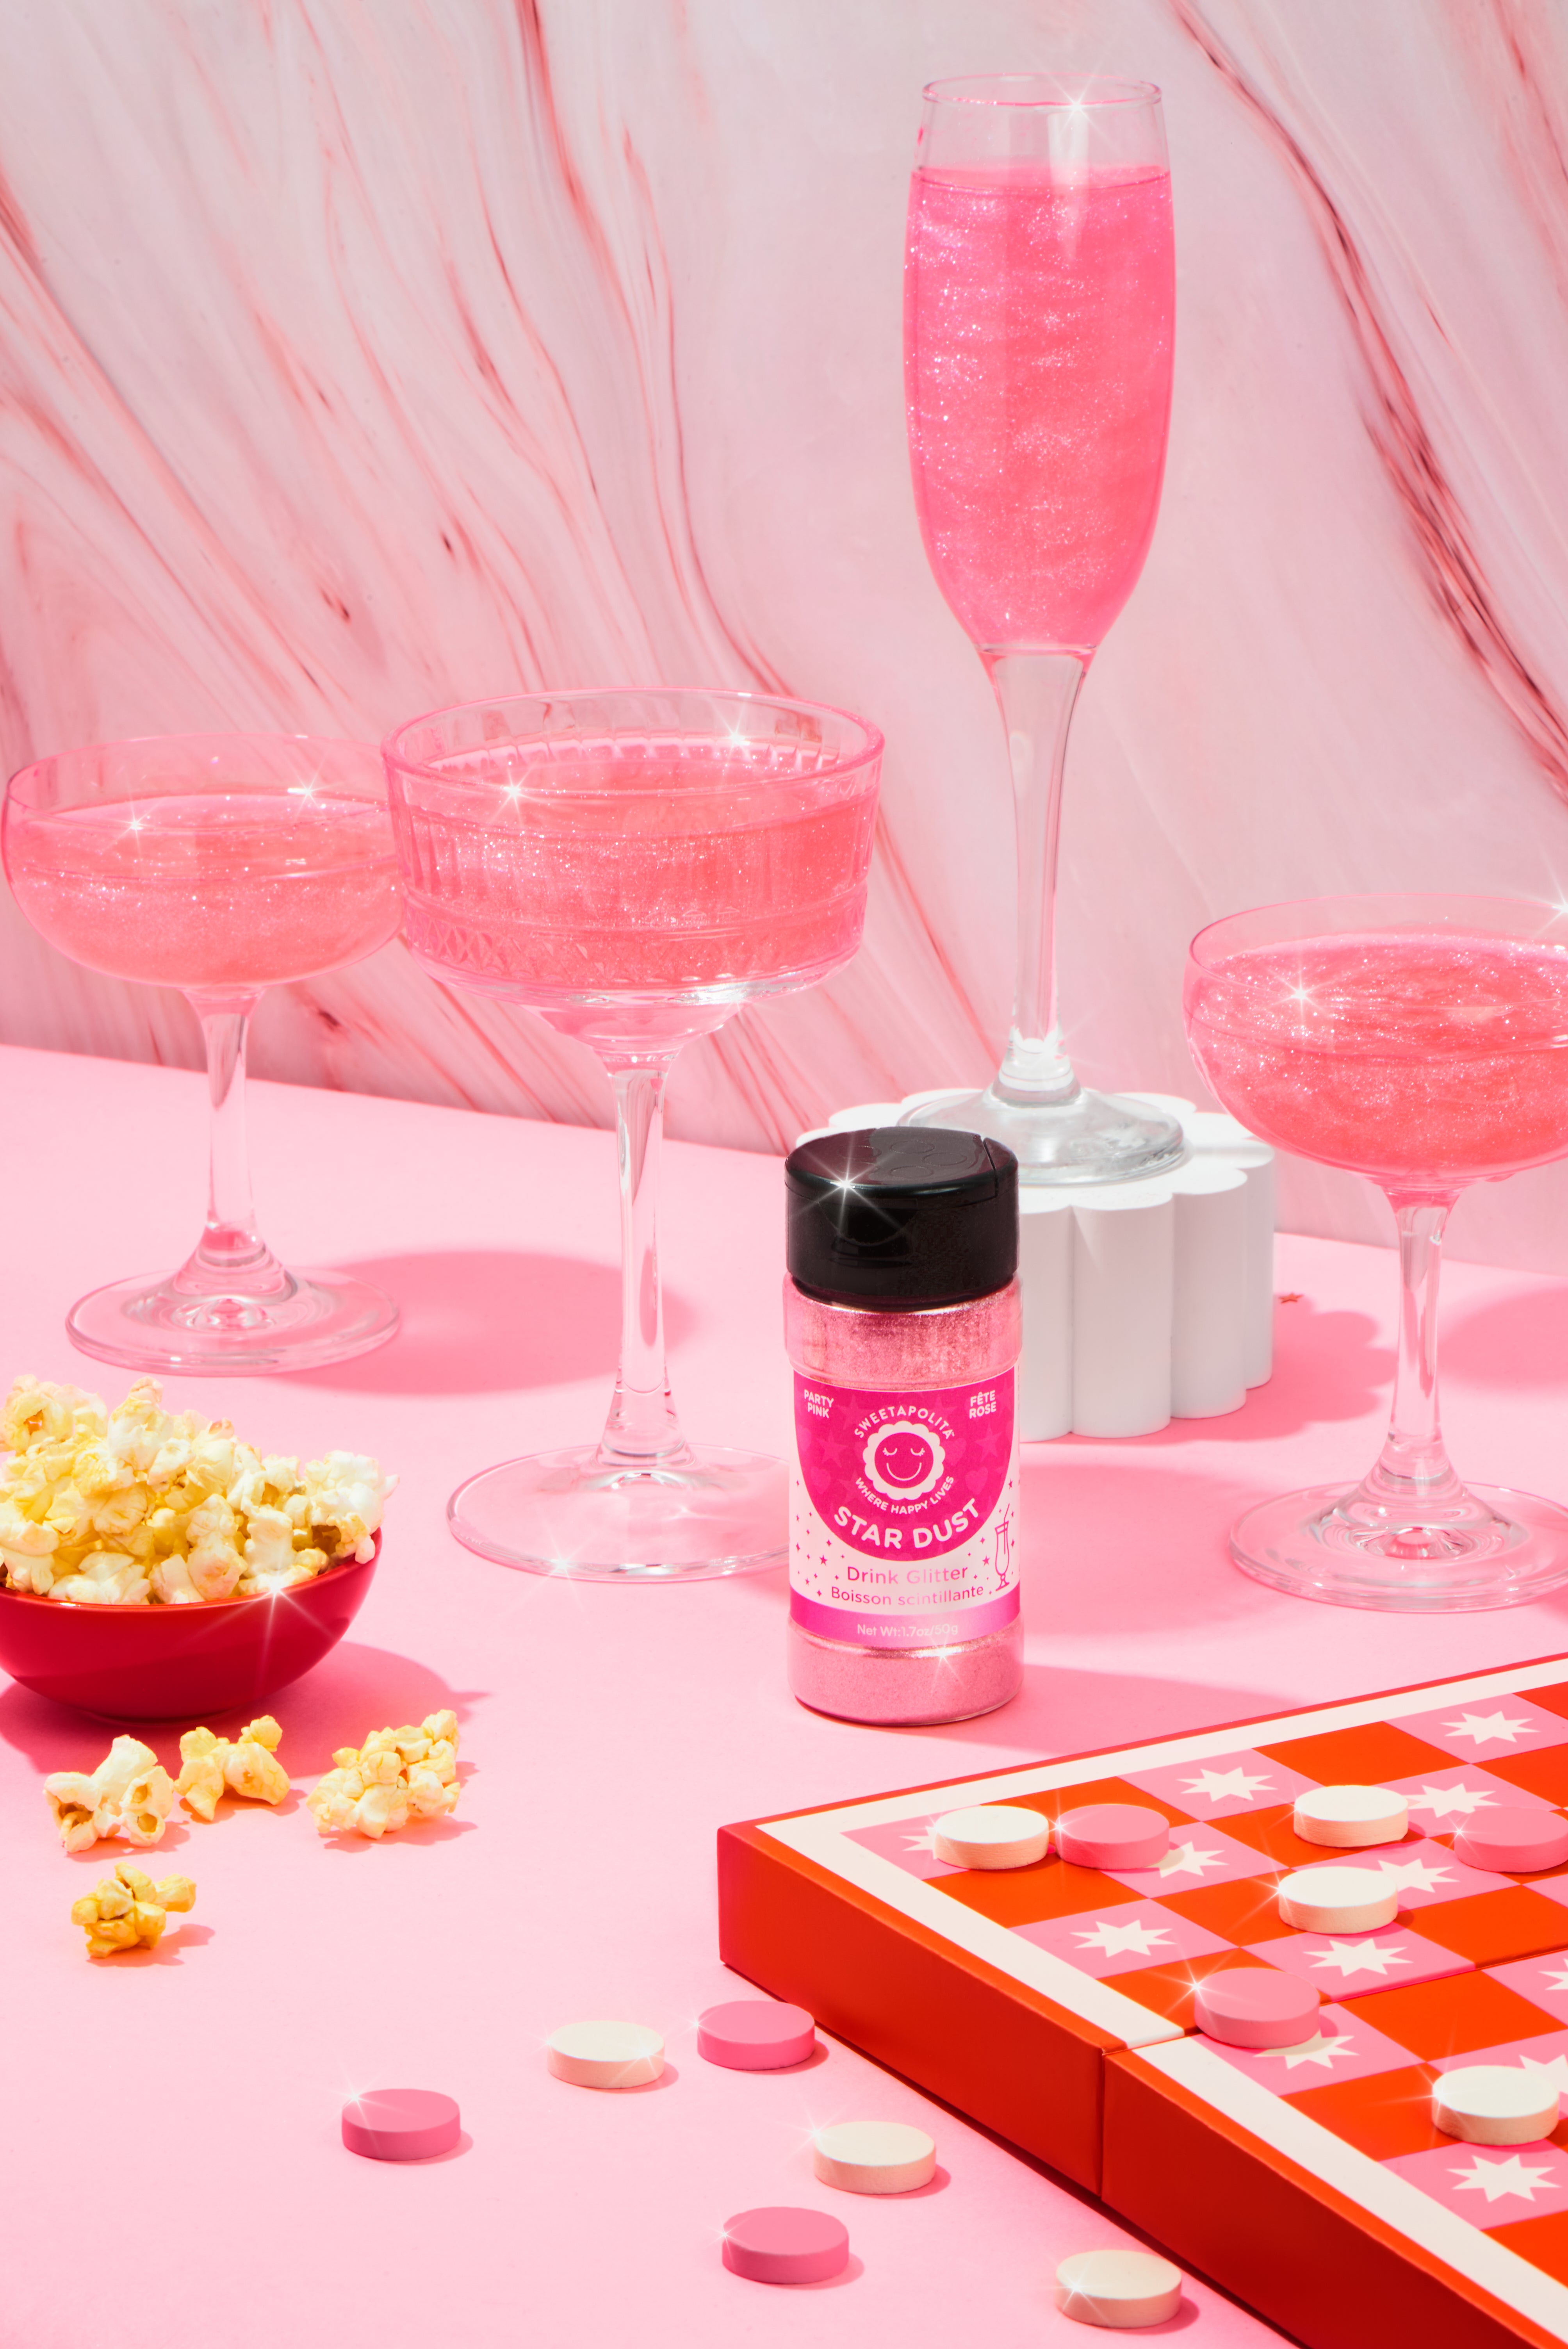 Party Pink | Star Dust Edible Drink Glitter - US